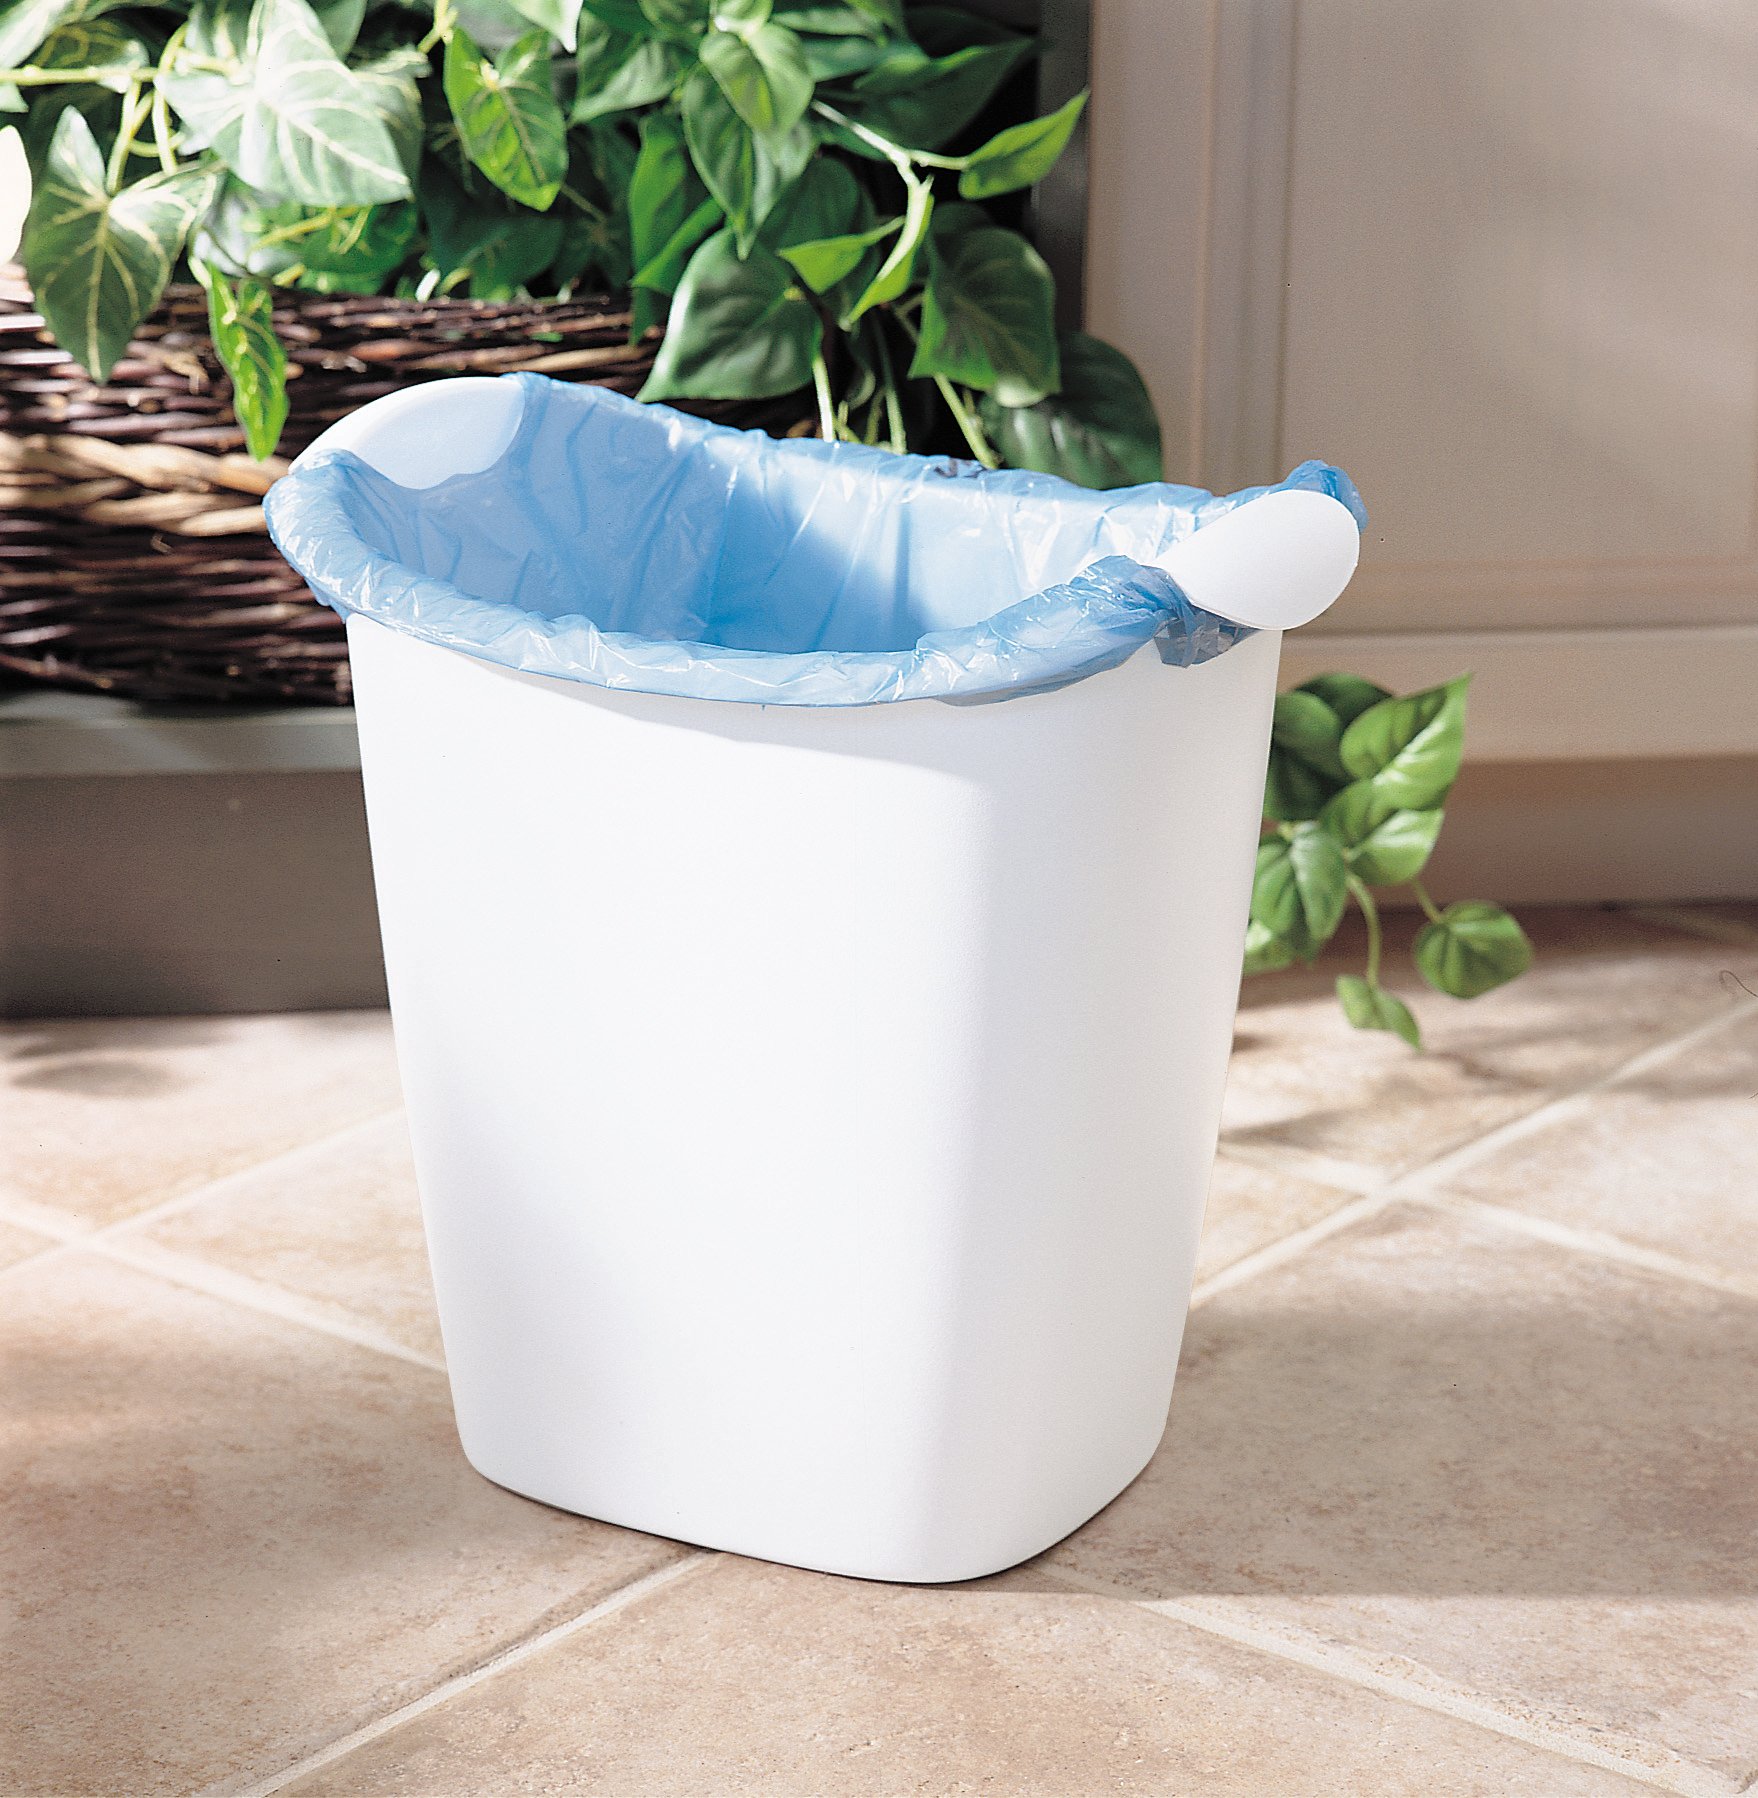 Rubbermaid Small Trash Can, Plastic, 3.5-Gallon/14-Court, White Wastebasket for Kitchen/Office/Bedroom/Bathroom